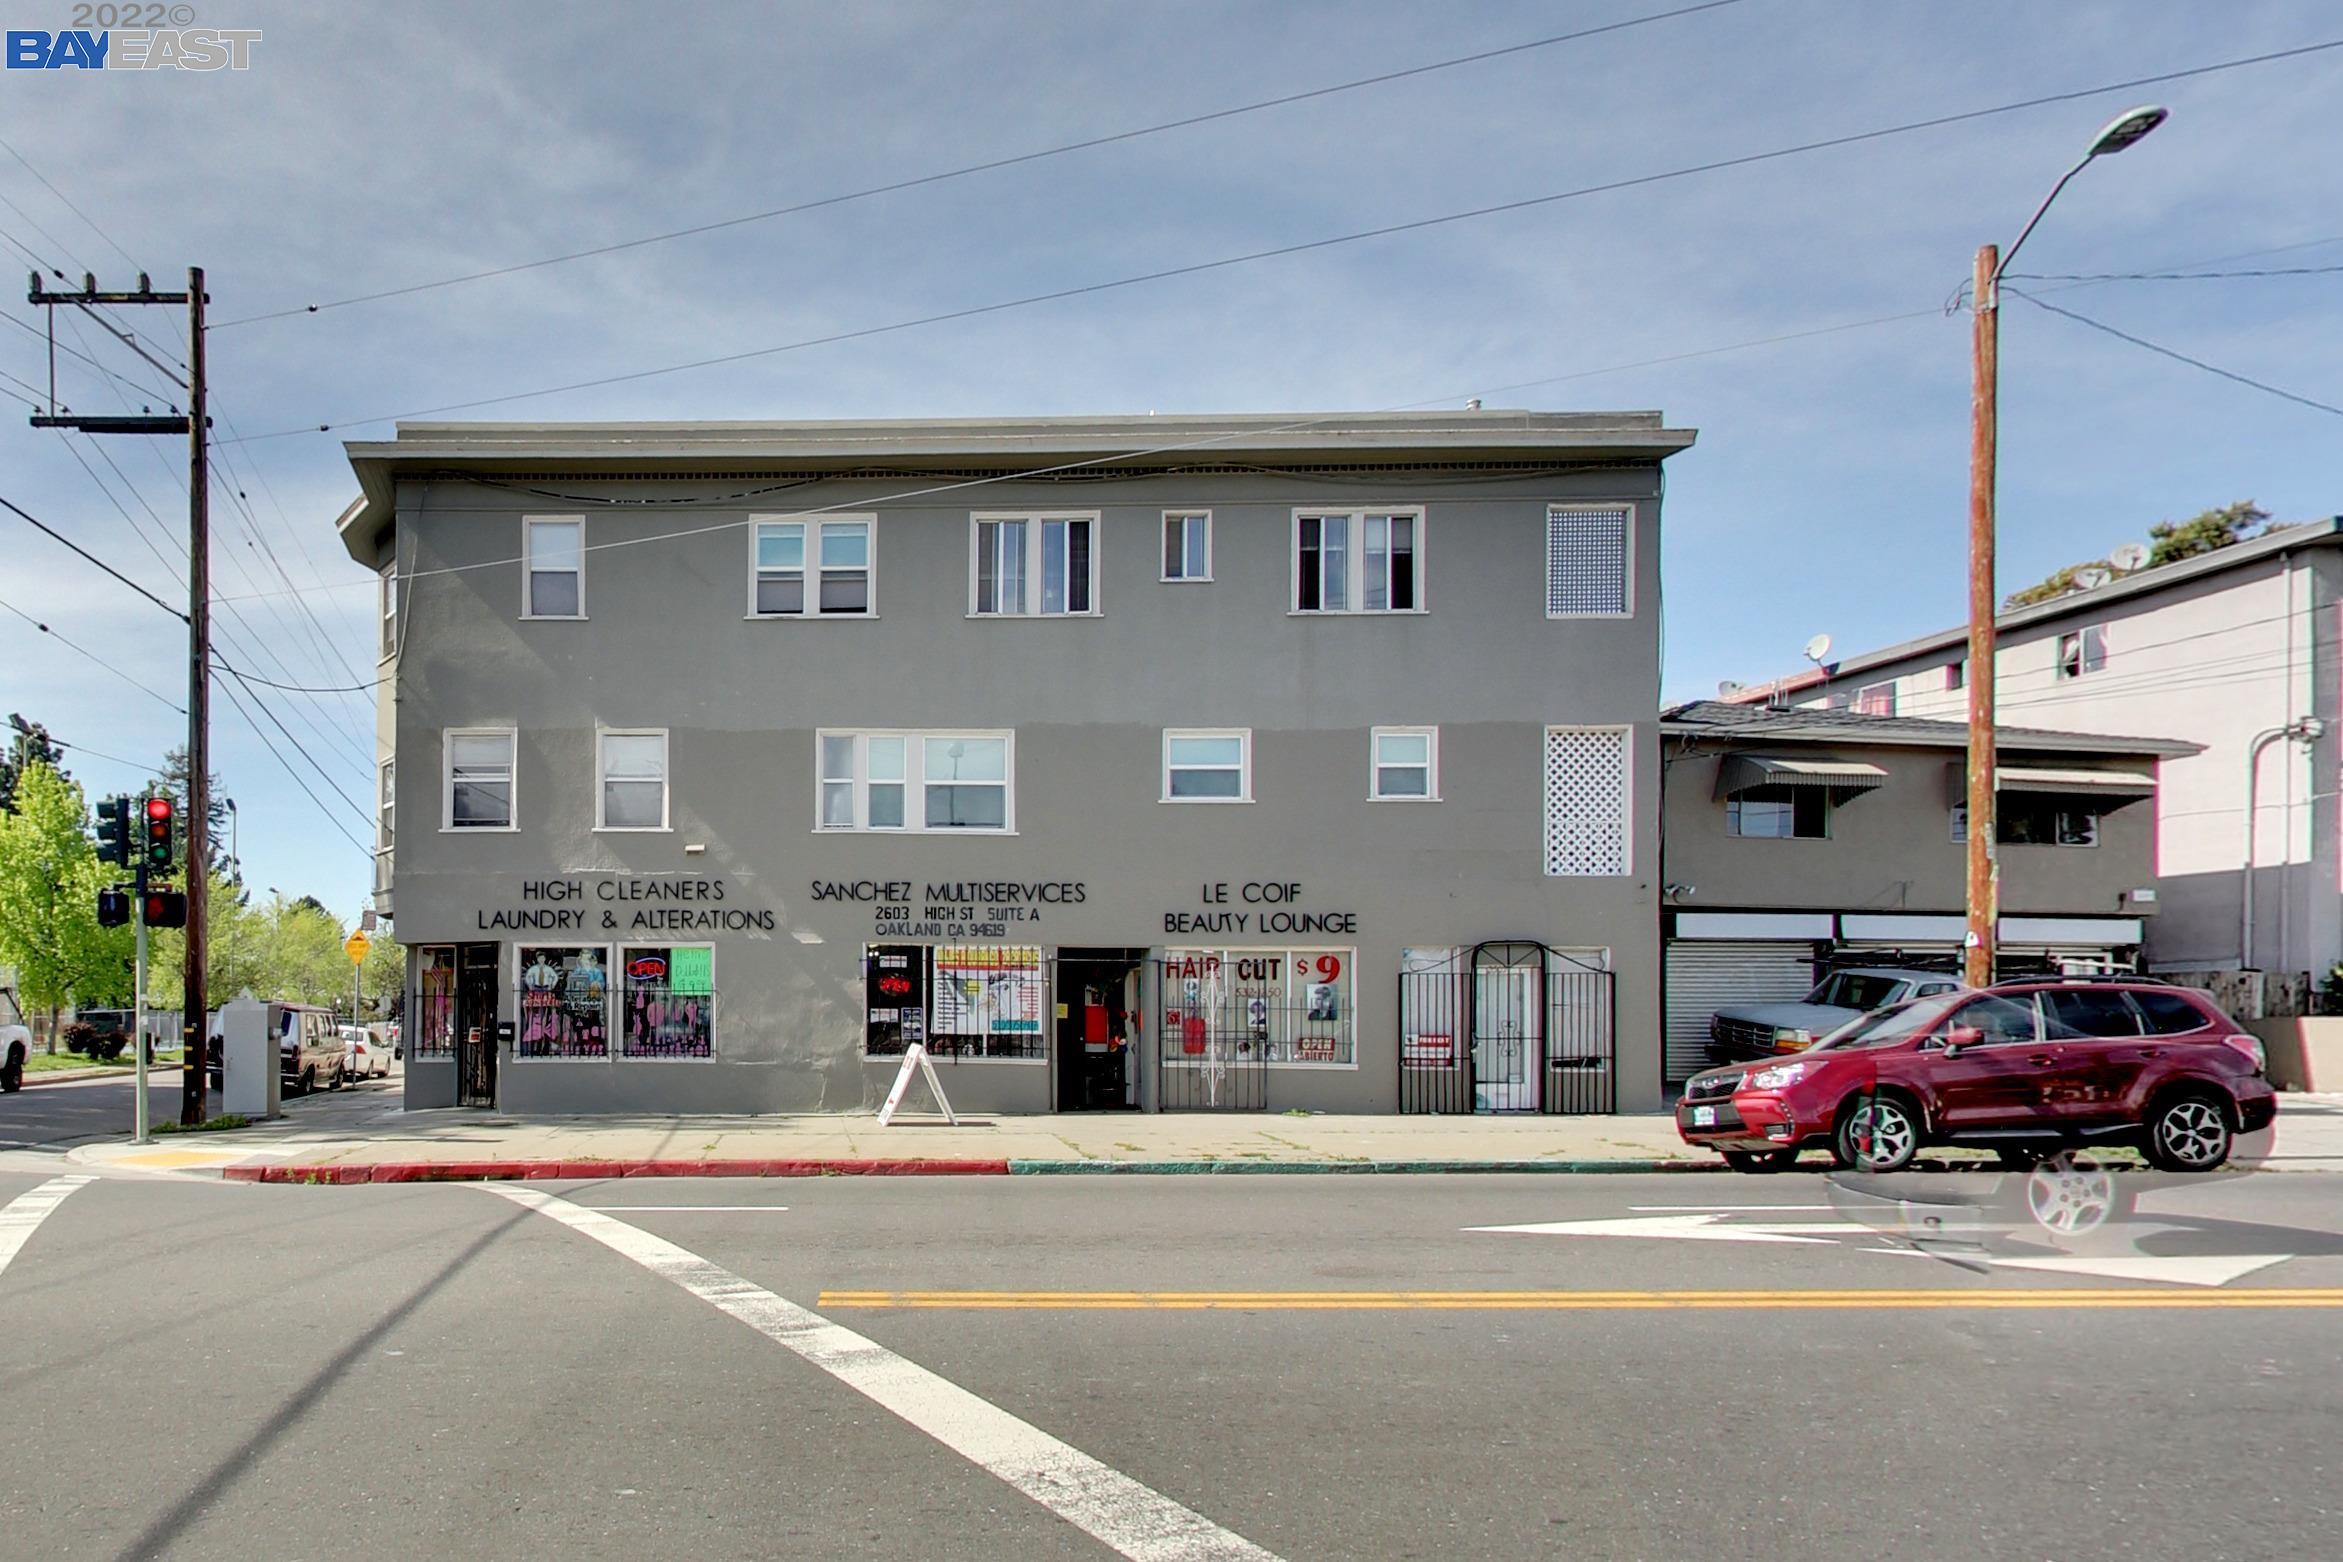 Photo of 2605 High St in Oakland, CA